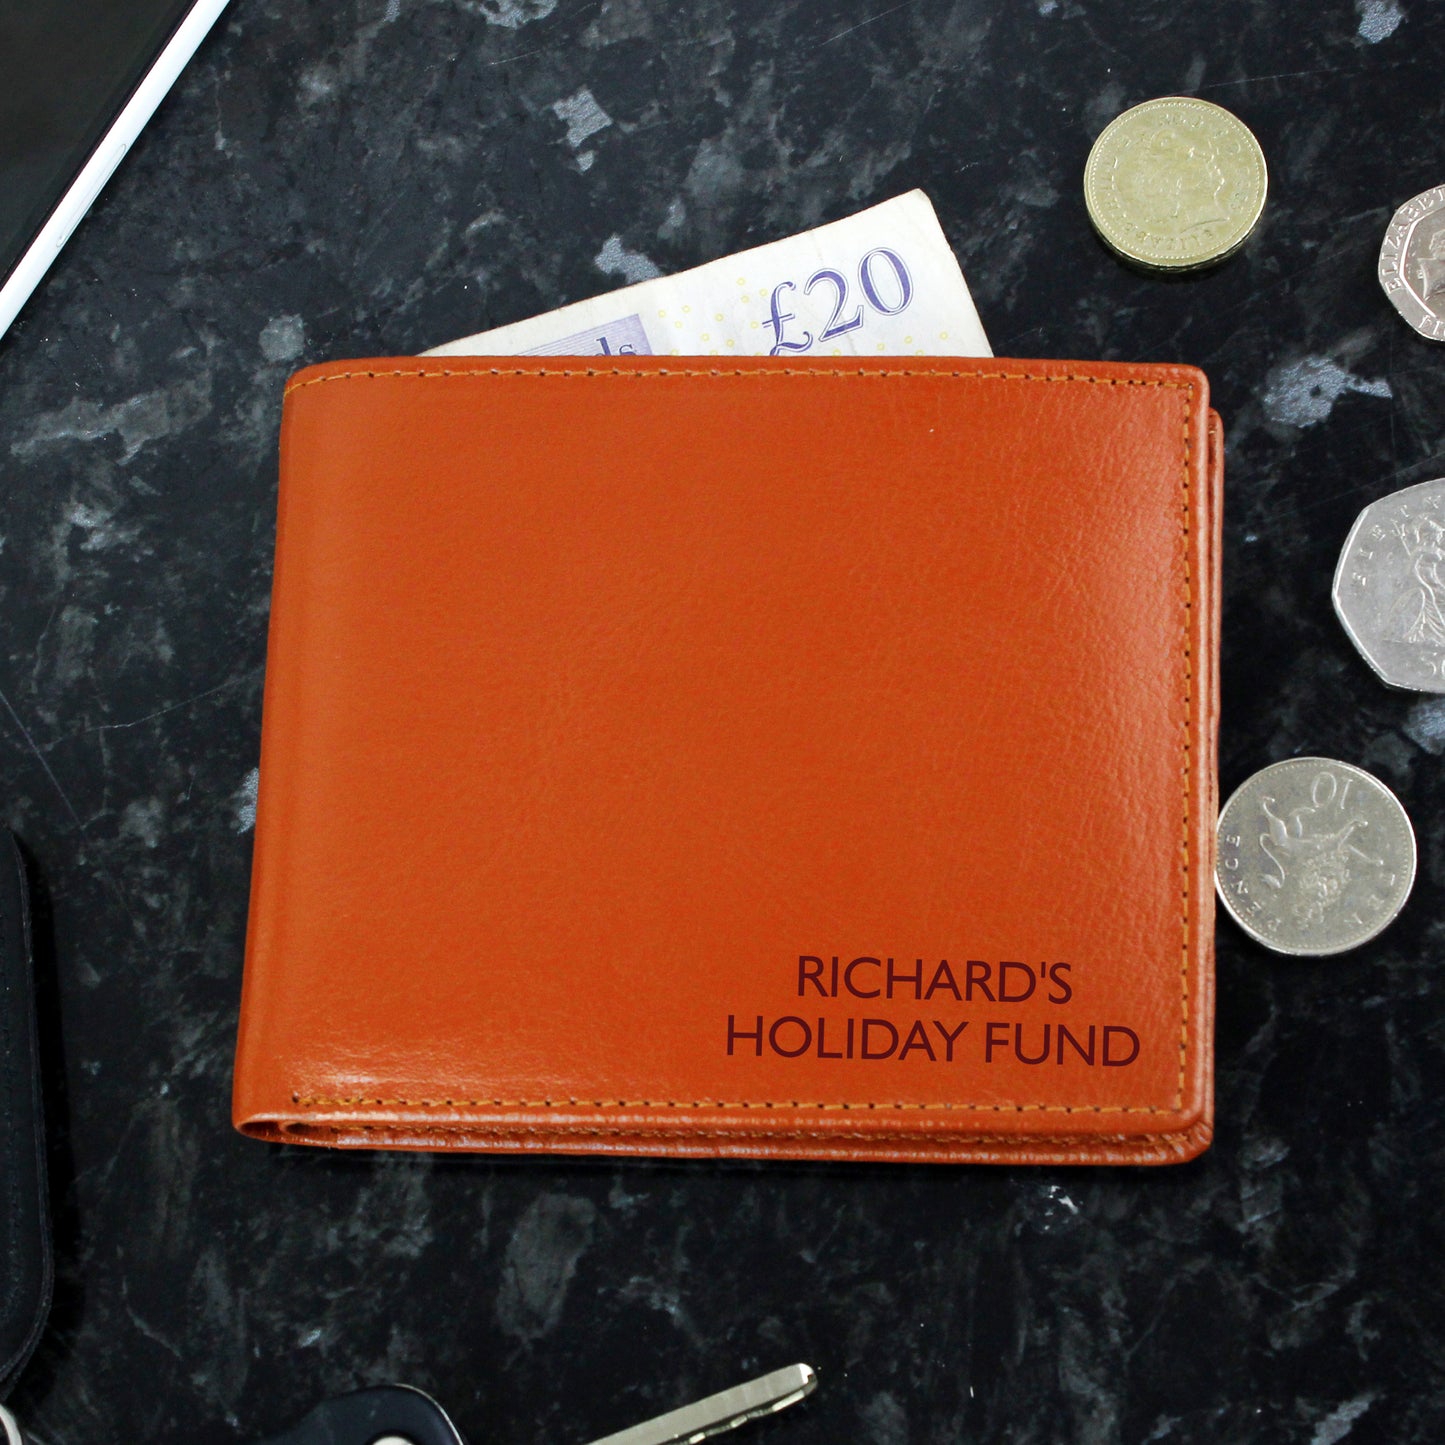 Personalised Message Tan Leather Wallet - Personalise It!